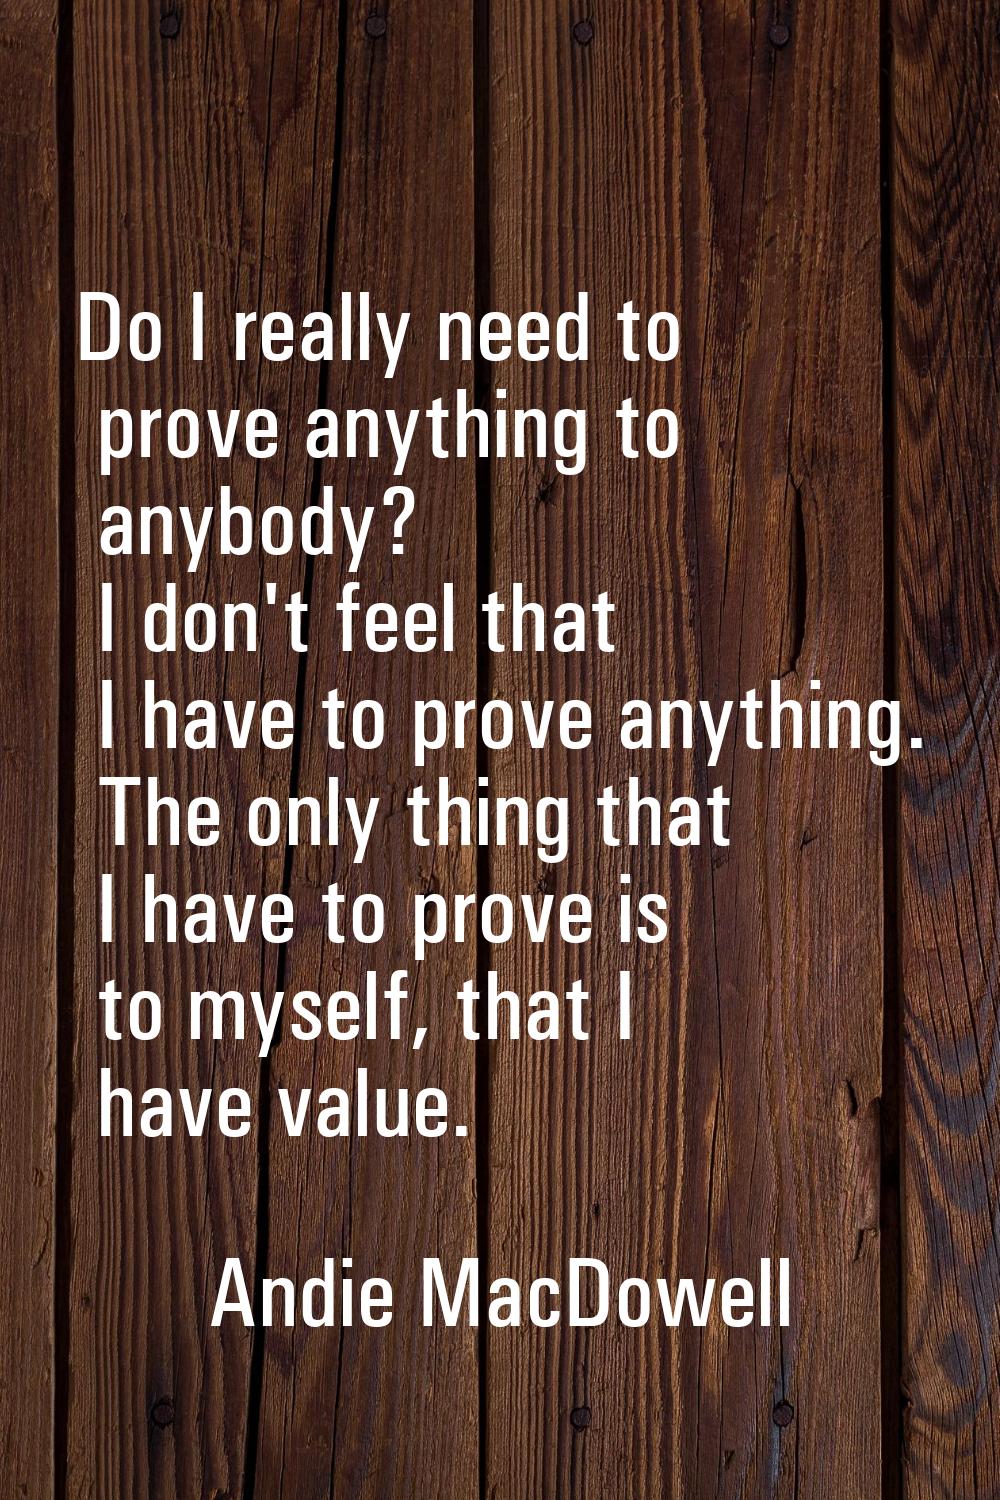 Do I really need to prove anything to anybody? I don't feel that I have to prove anything. The only